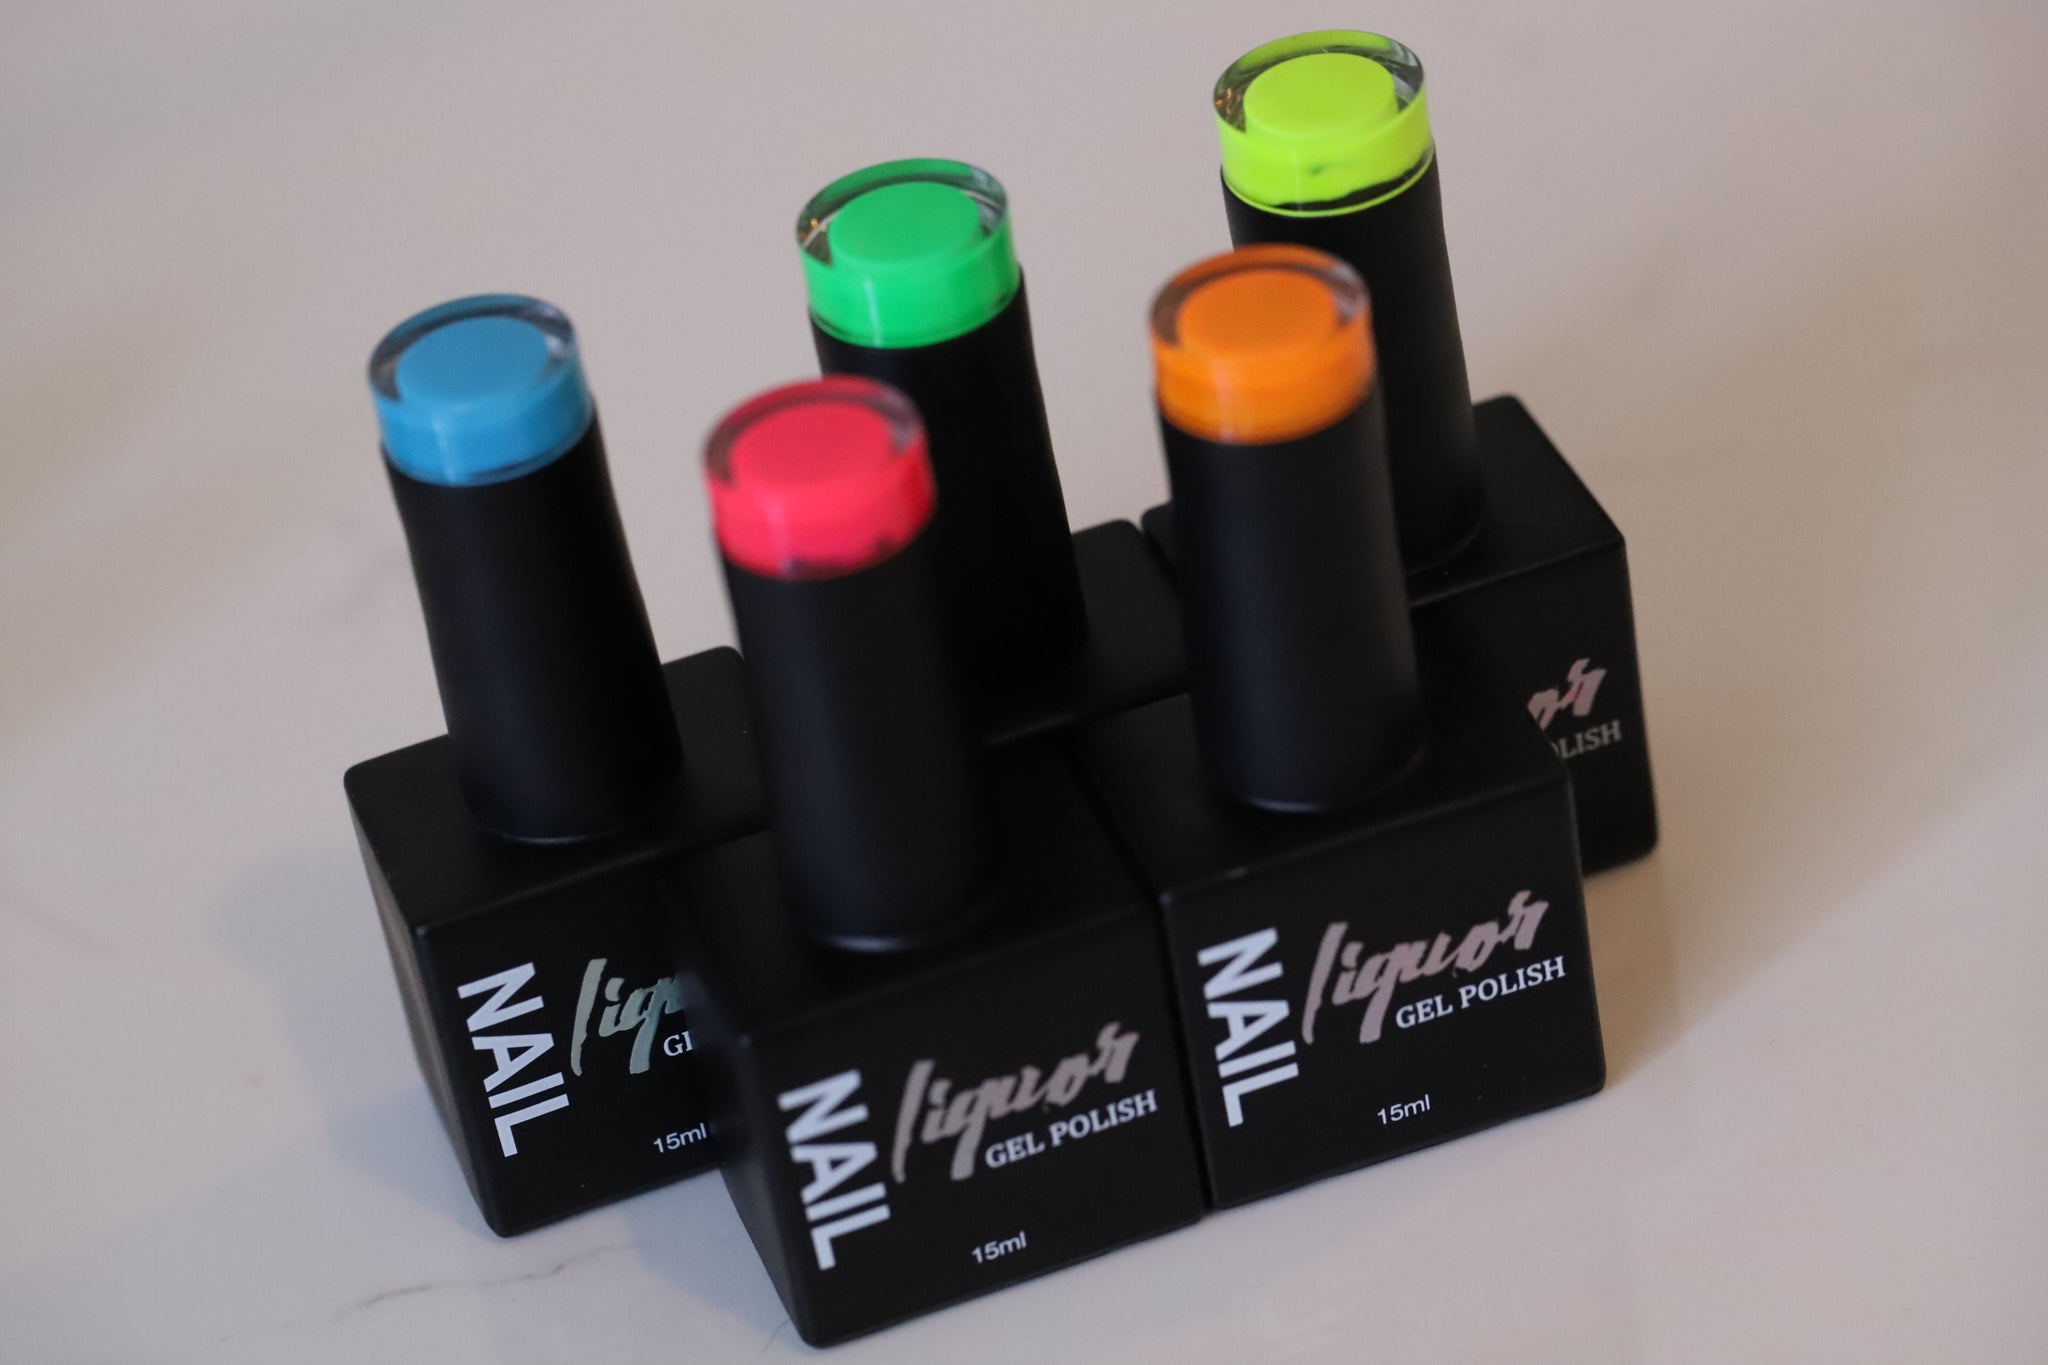 The Highlighters